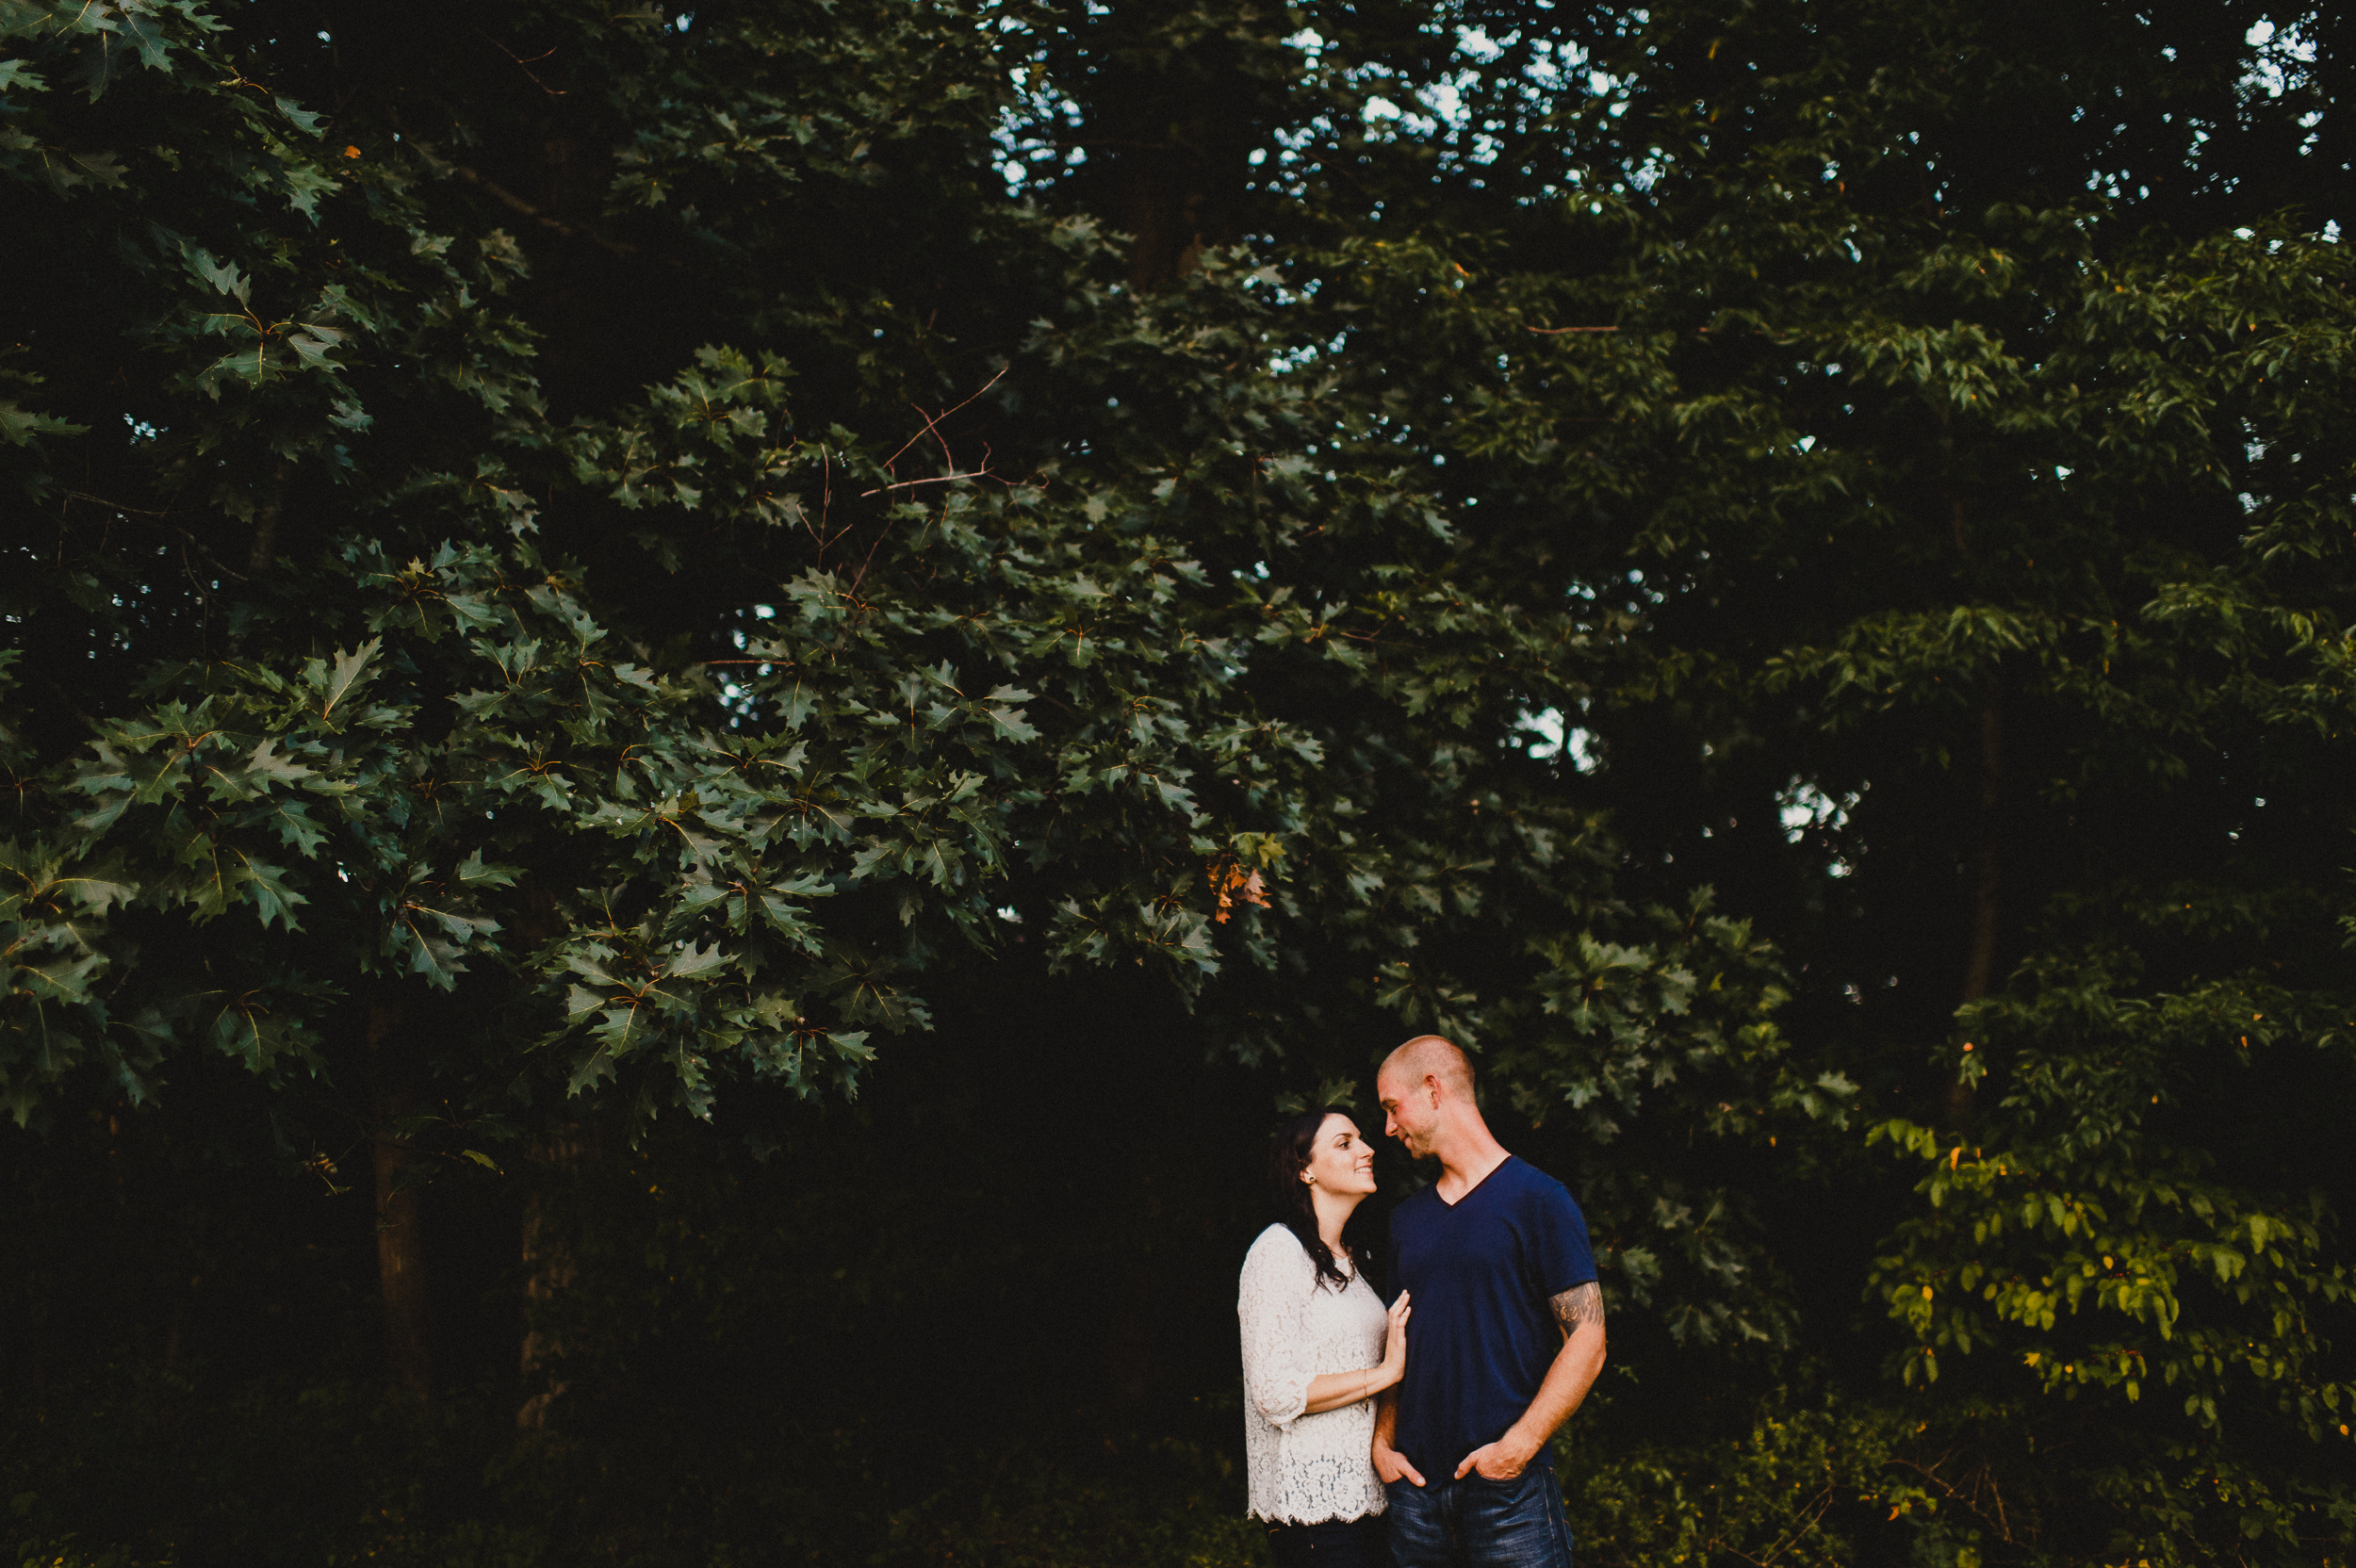 pat-robinson-photography-pa-engagement-session-20.jpg